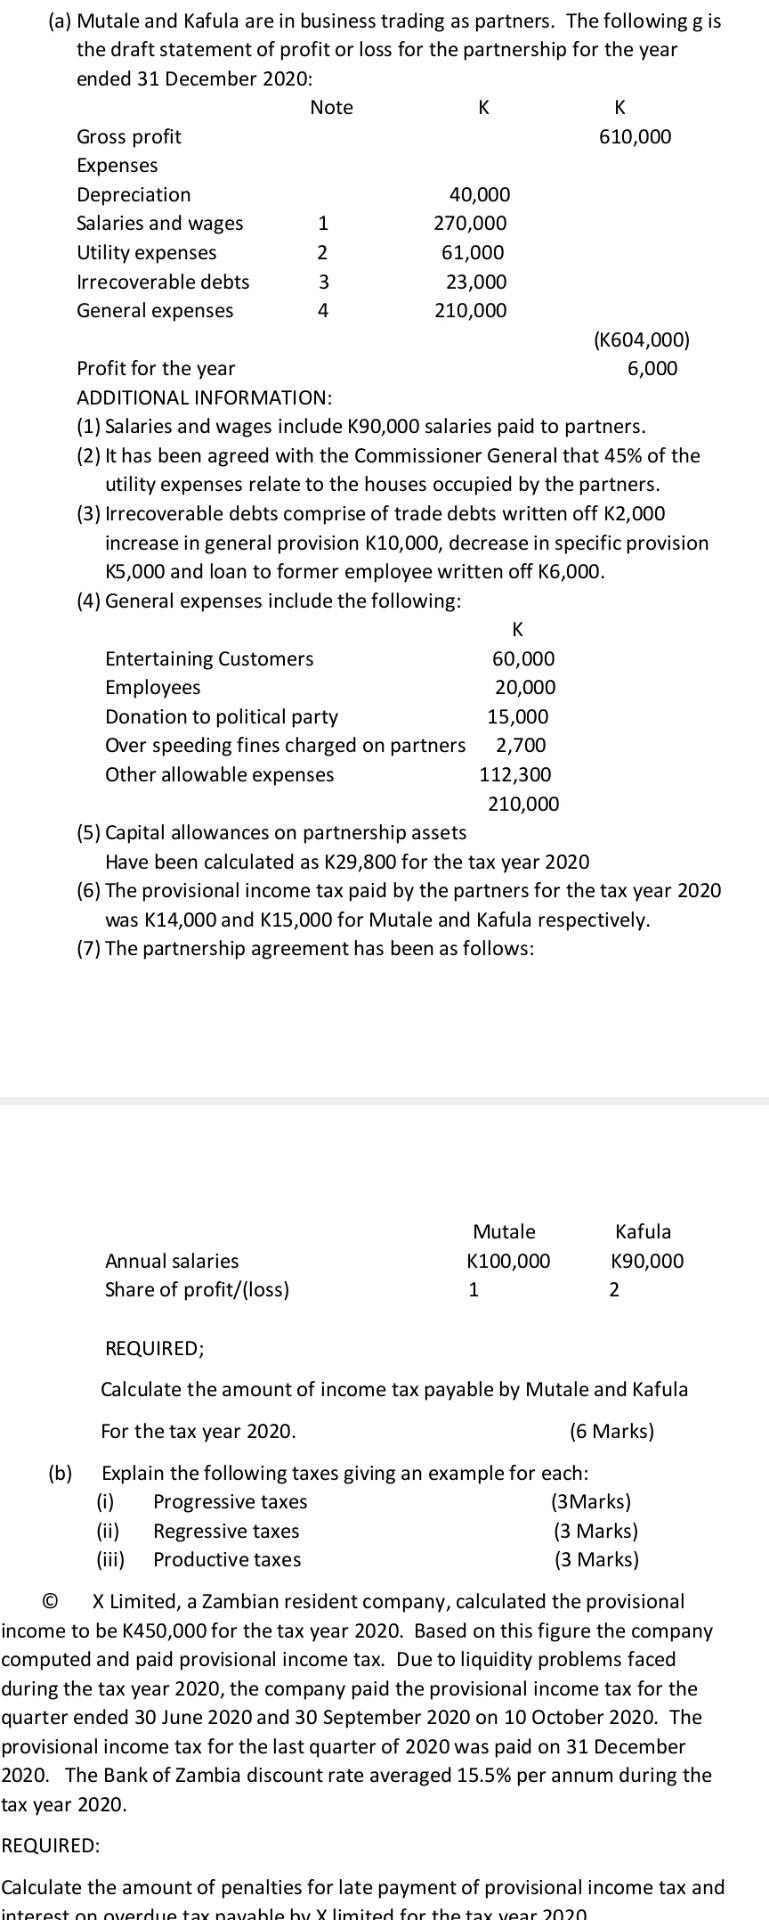 (a) Mutale and Kafula are in business trading as partners. The following g is the draft statement of profit